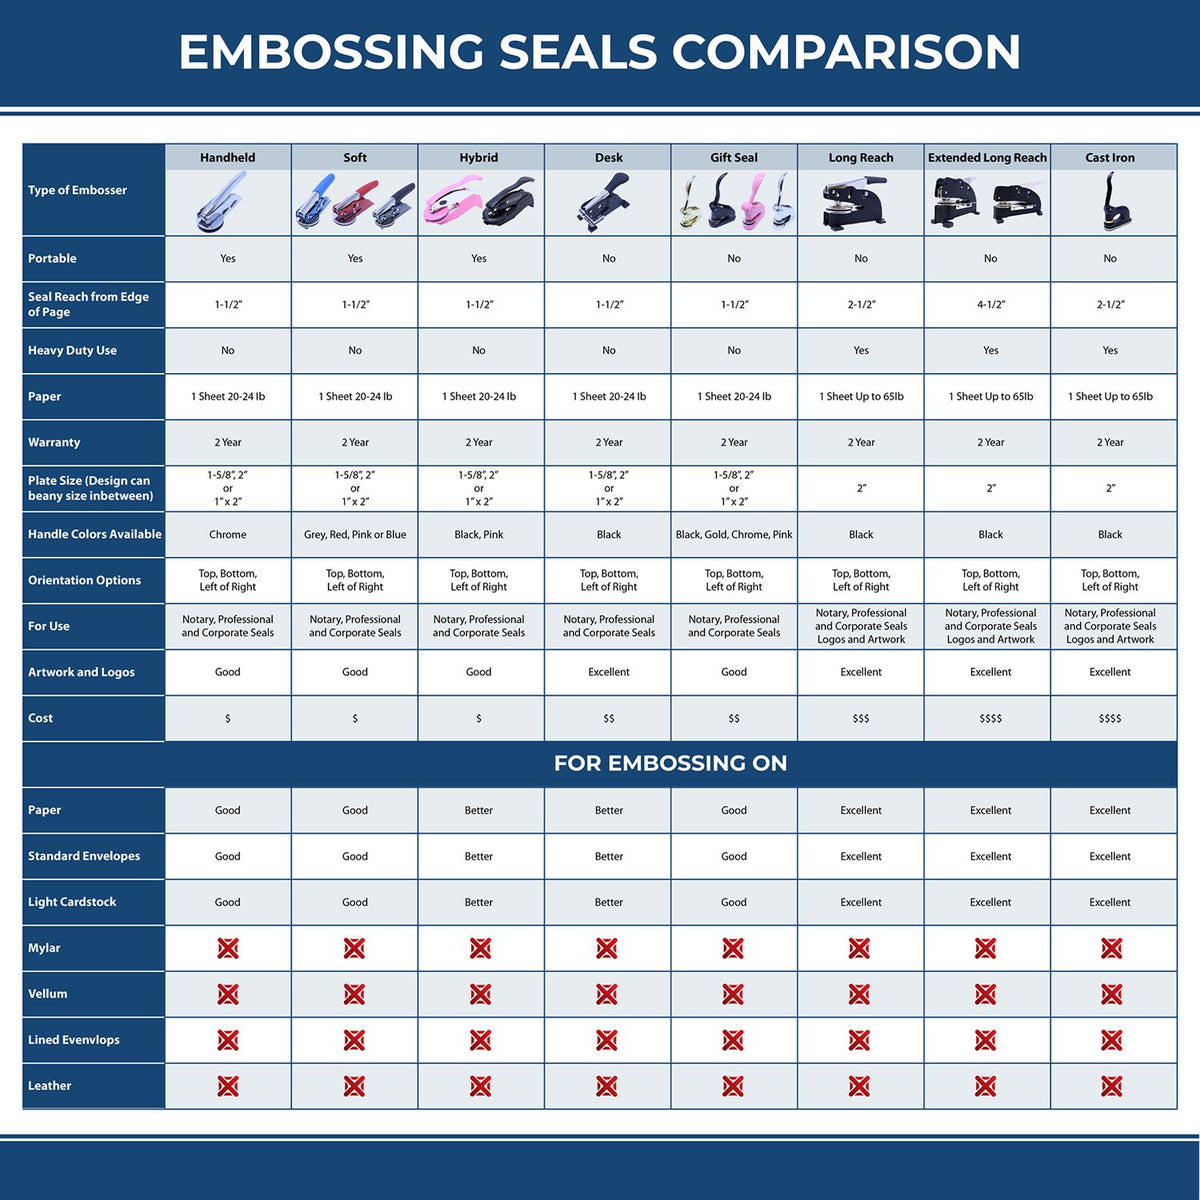 A comparison chart for the different types of mount models available for the Extended Long Reach Missouri Surveyor Embosser.